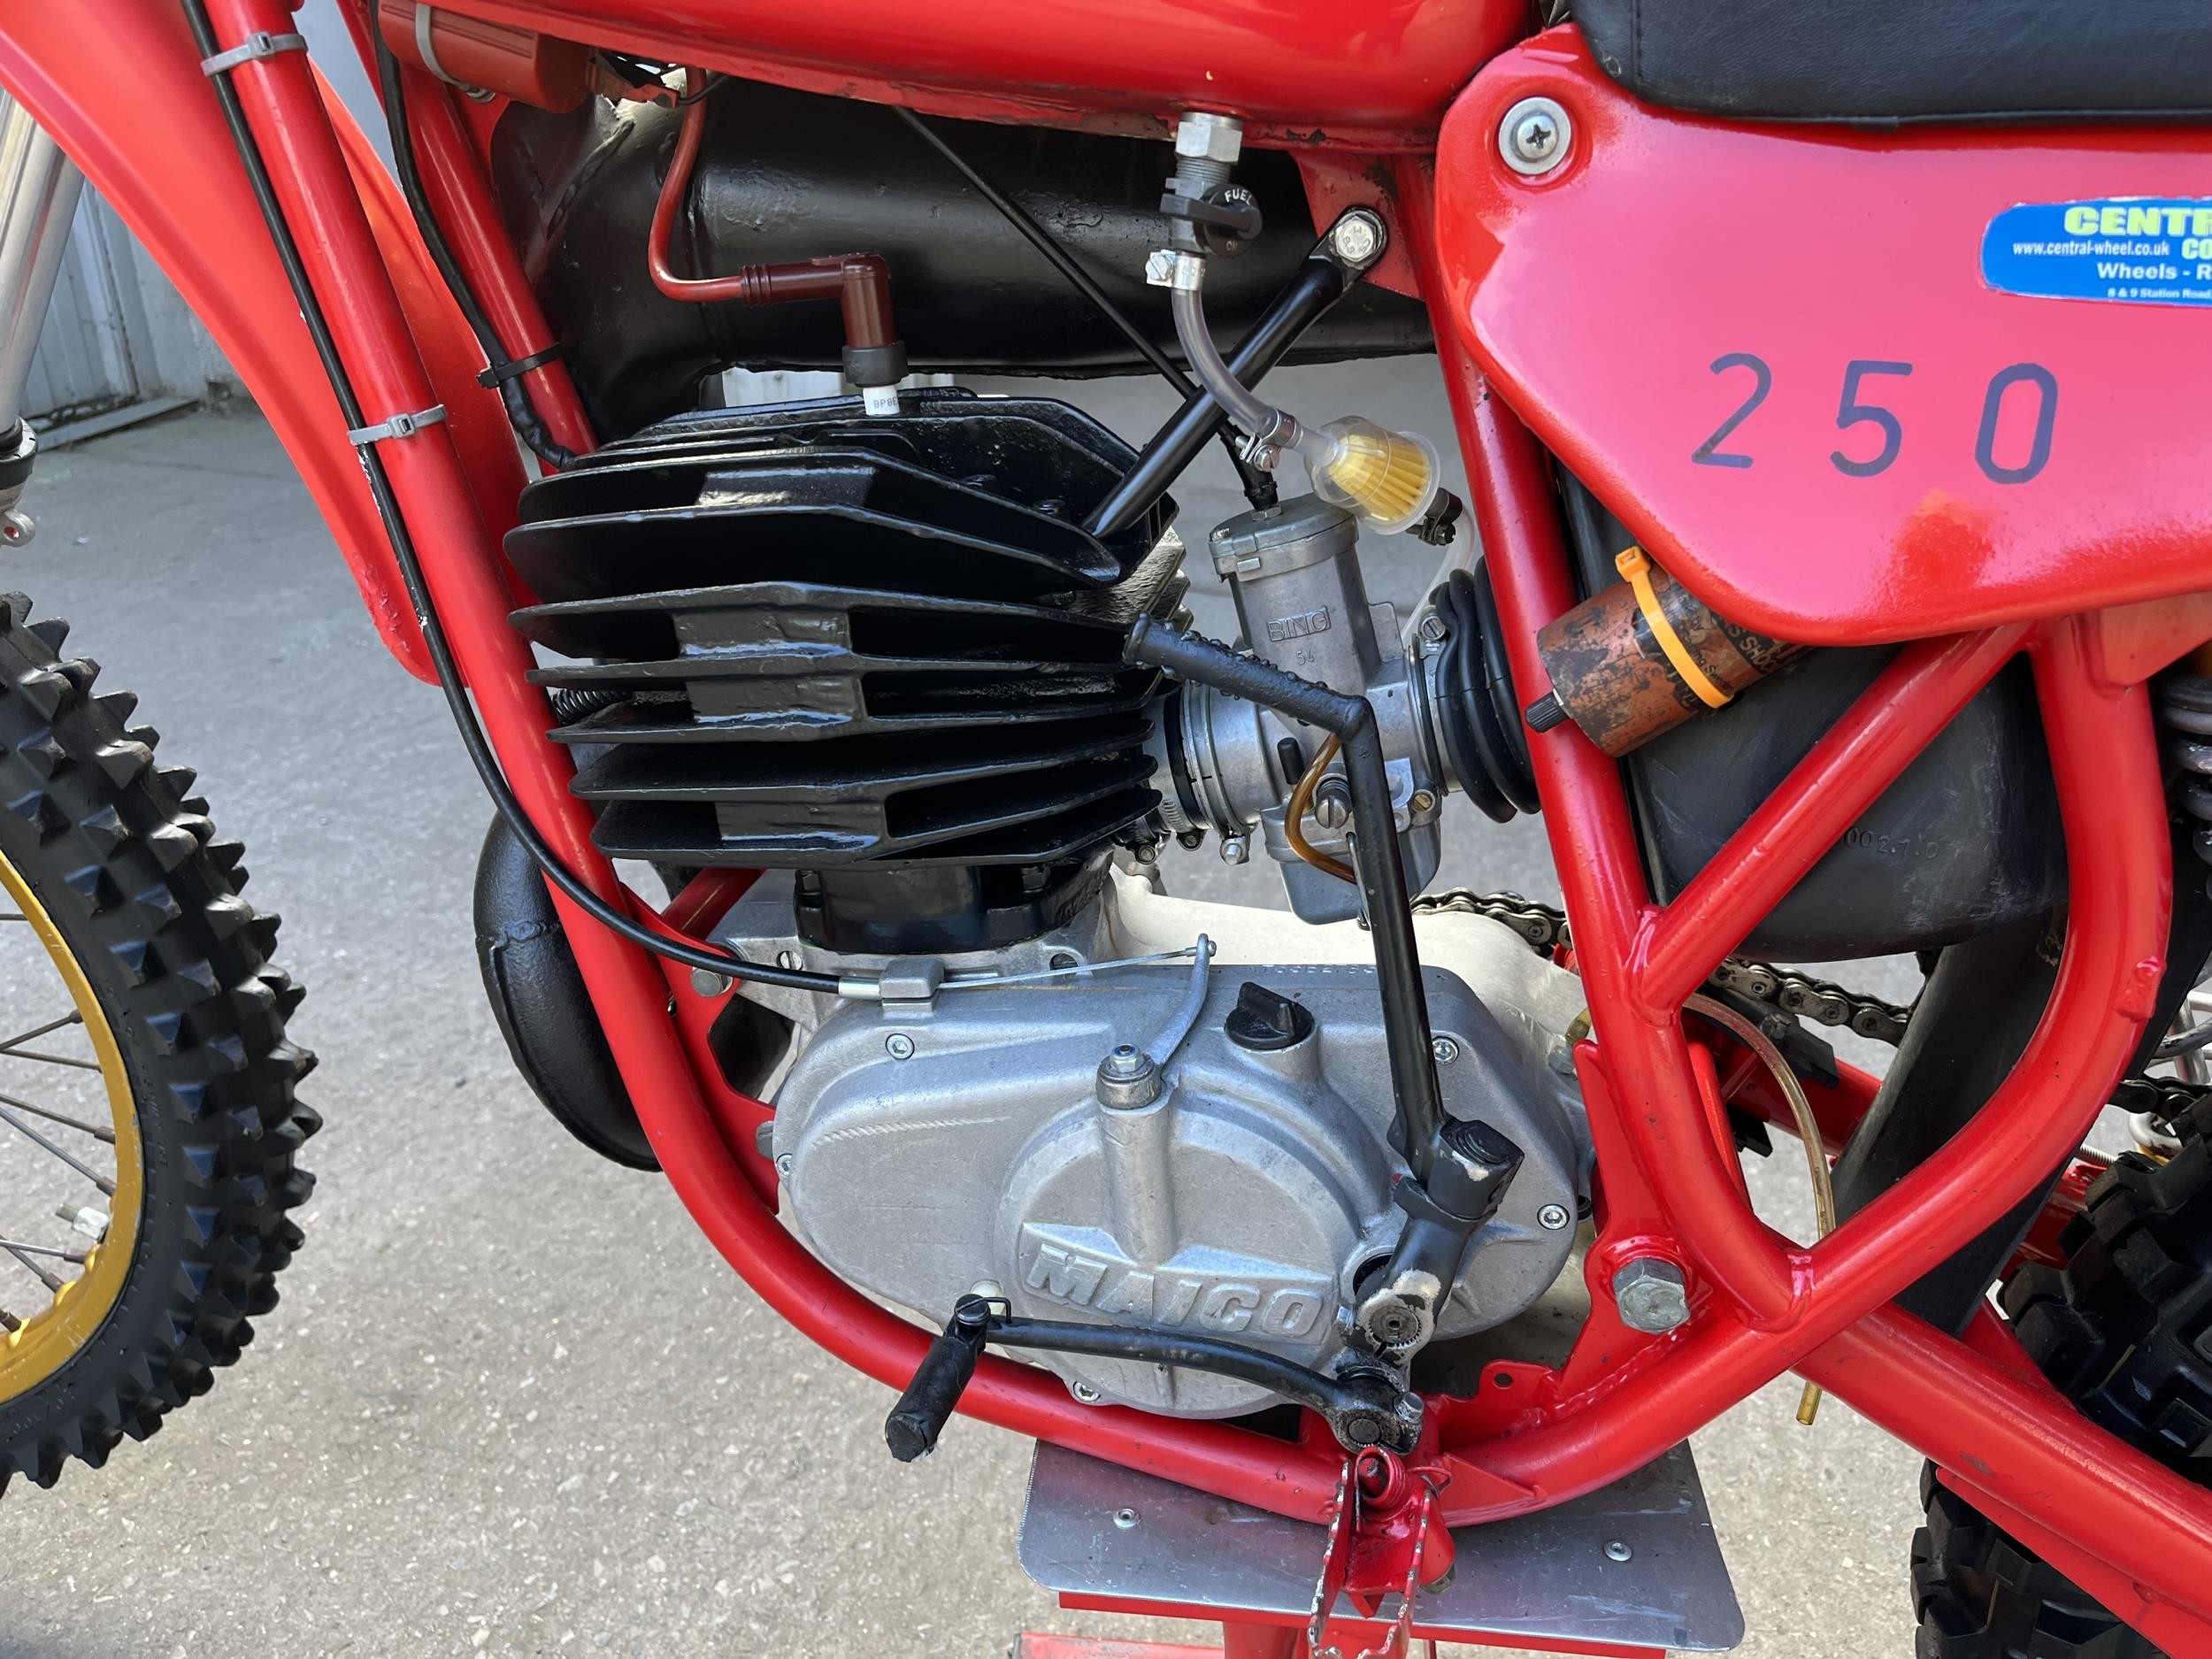 1979 Maico 250 Twin shock Frame number TBA Engine number MT 3362783 Restored by the present owner - Image 4 of 8